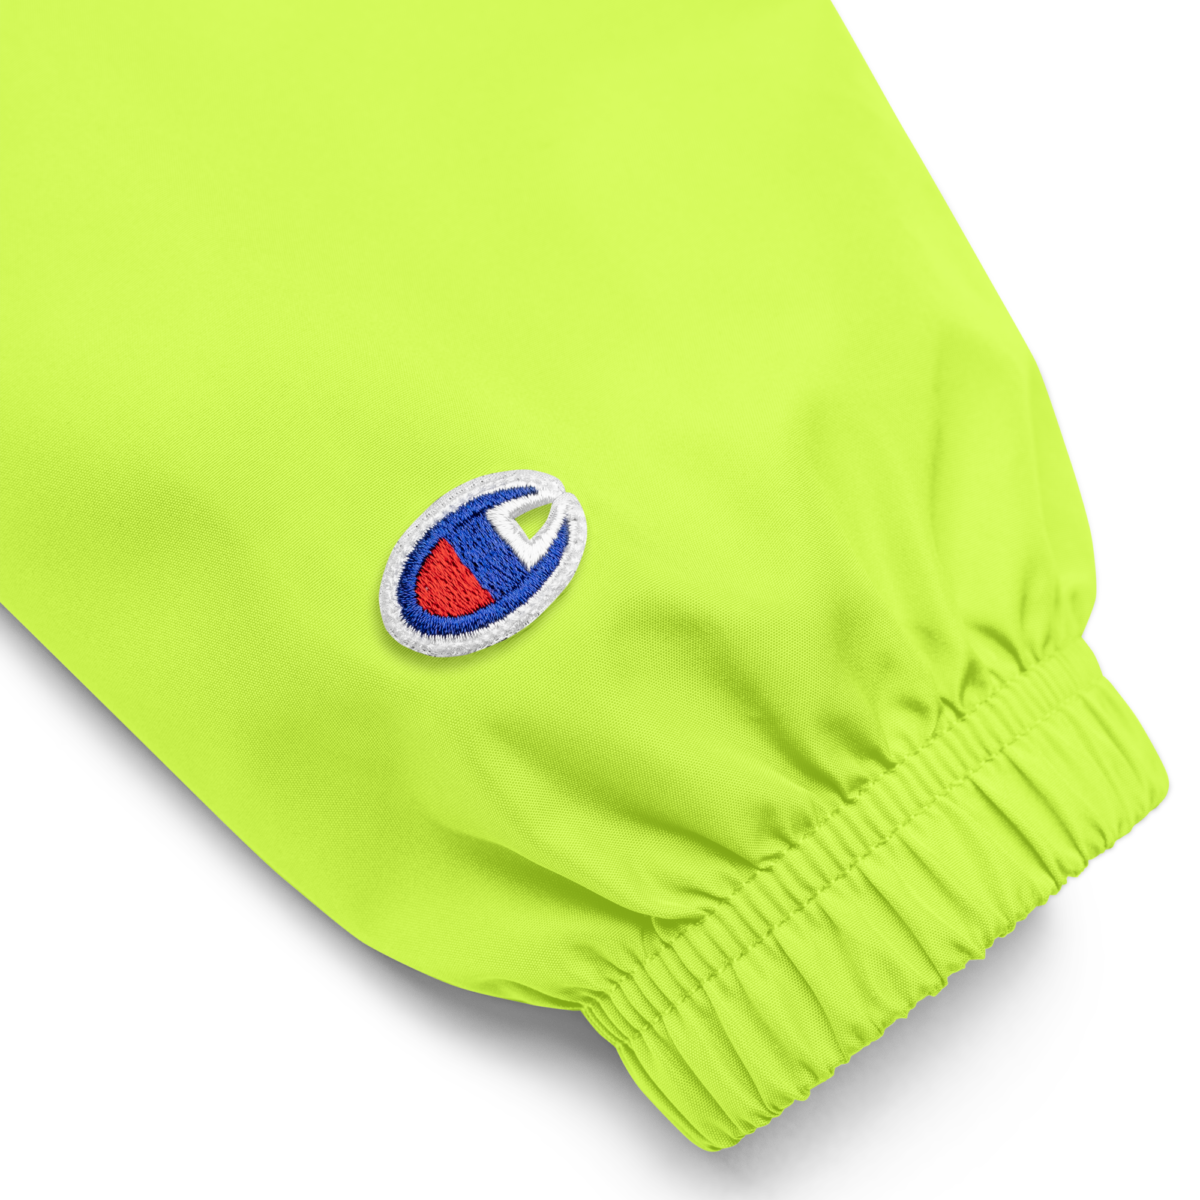 embroidered champion packable jacket safety green product details 631f52b593a05 - Bitcoin Champion Packable Jacket